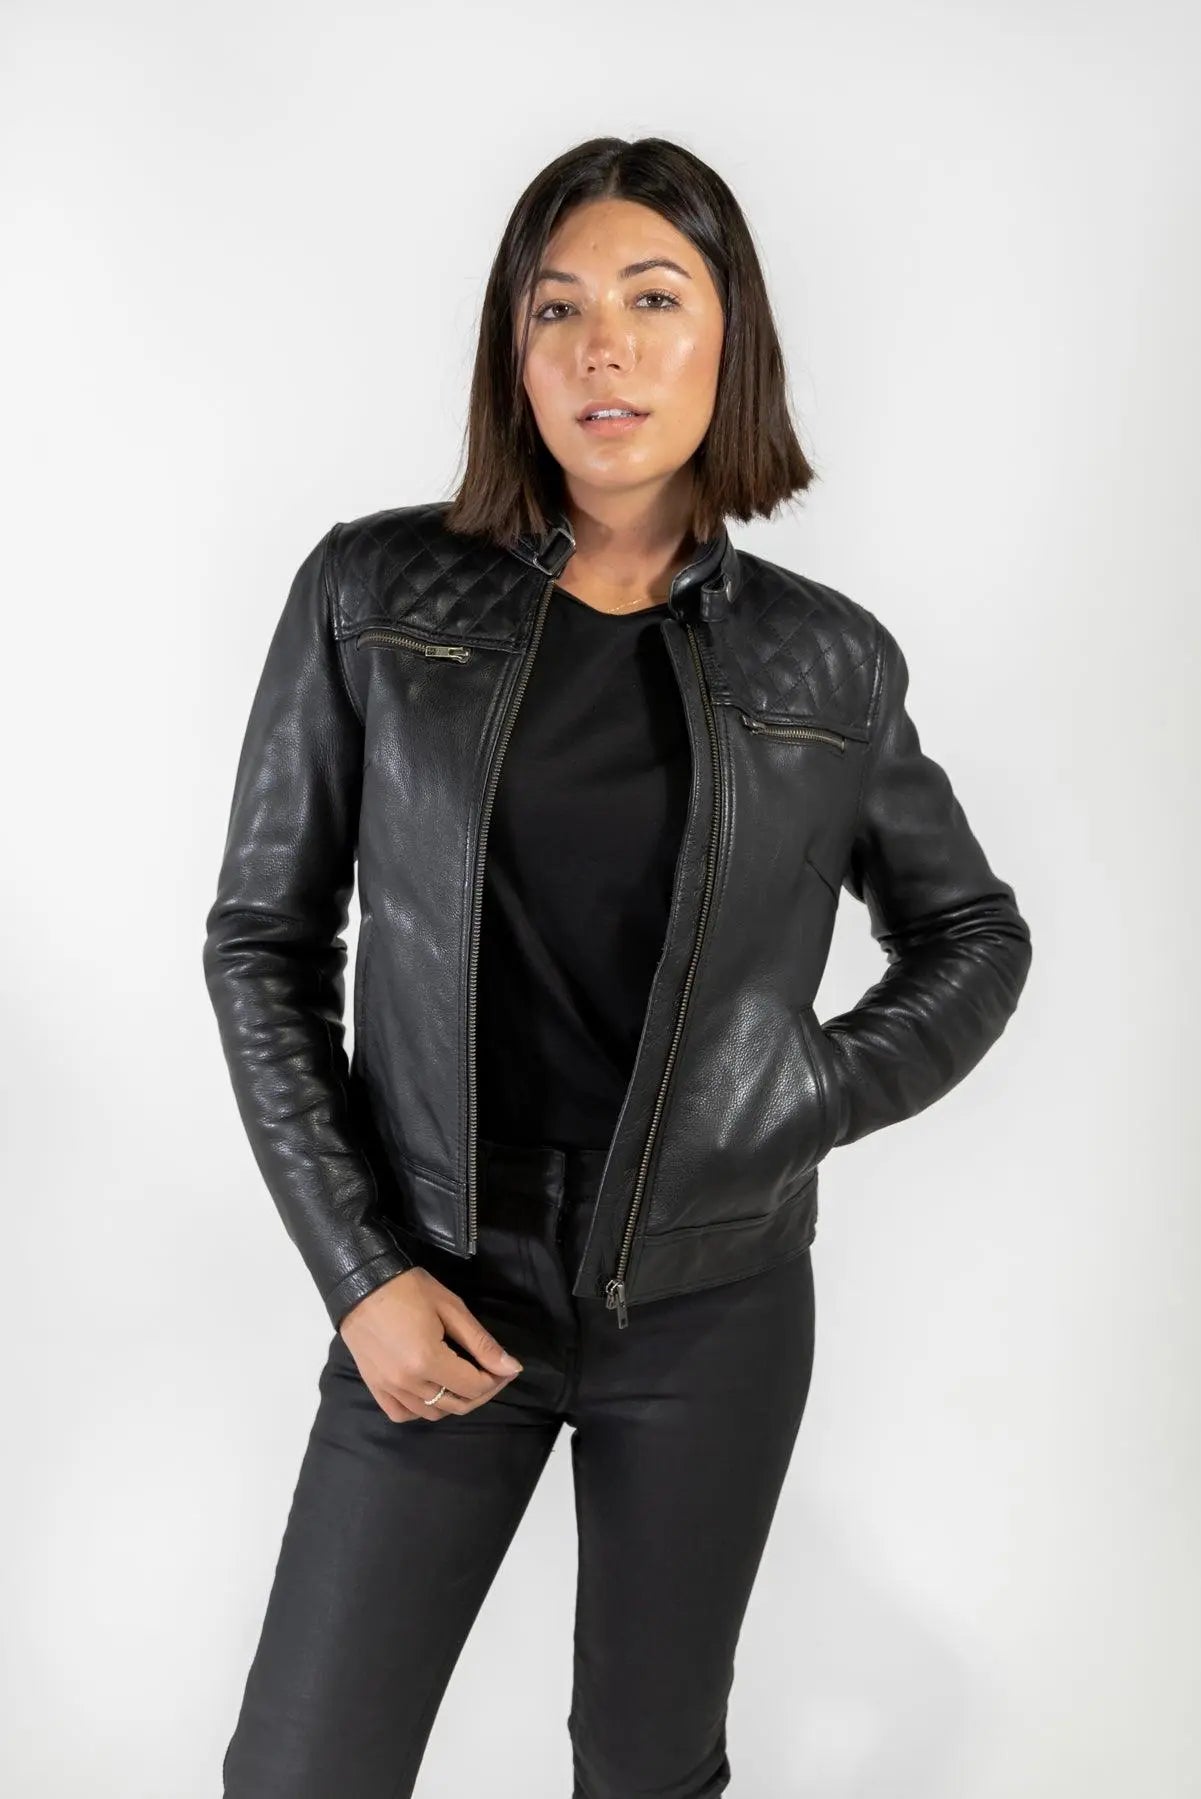 Motorcycle Clothing For Women